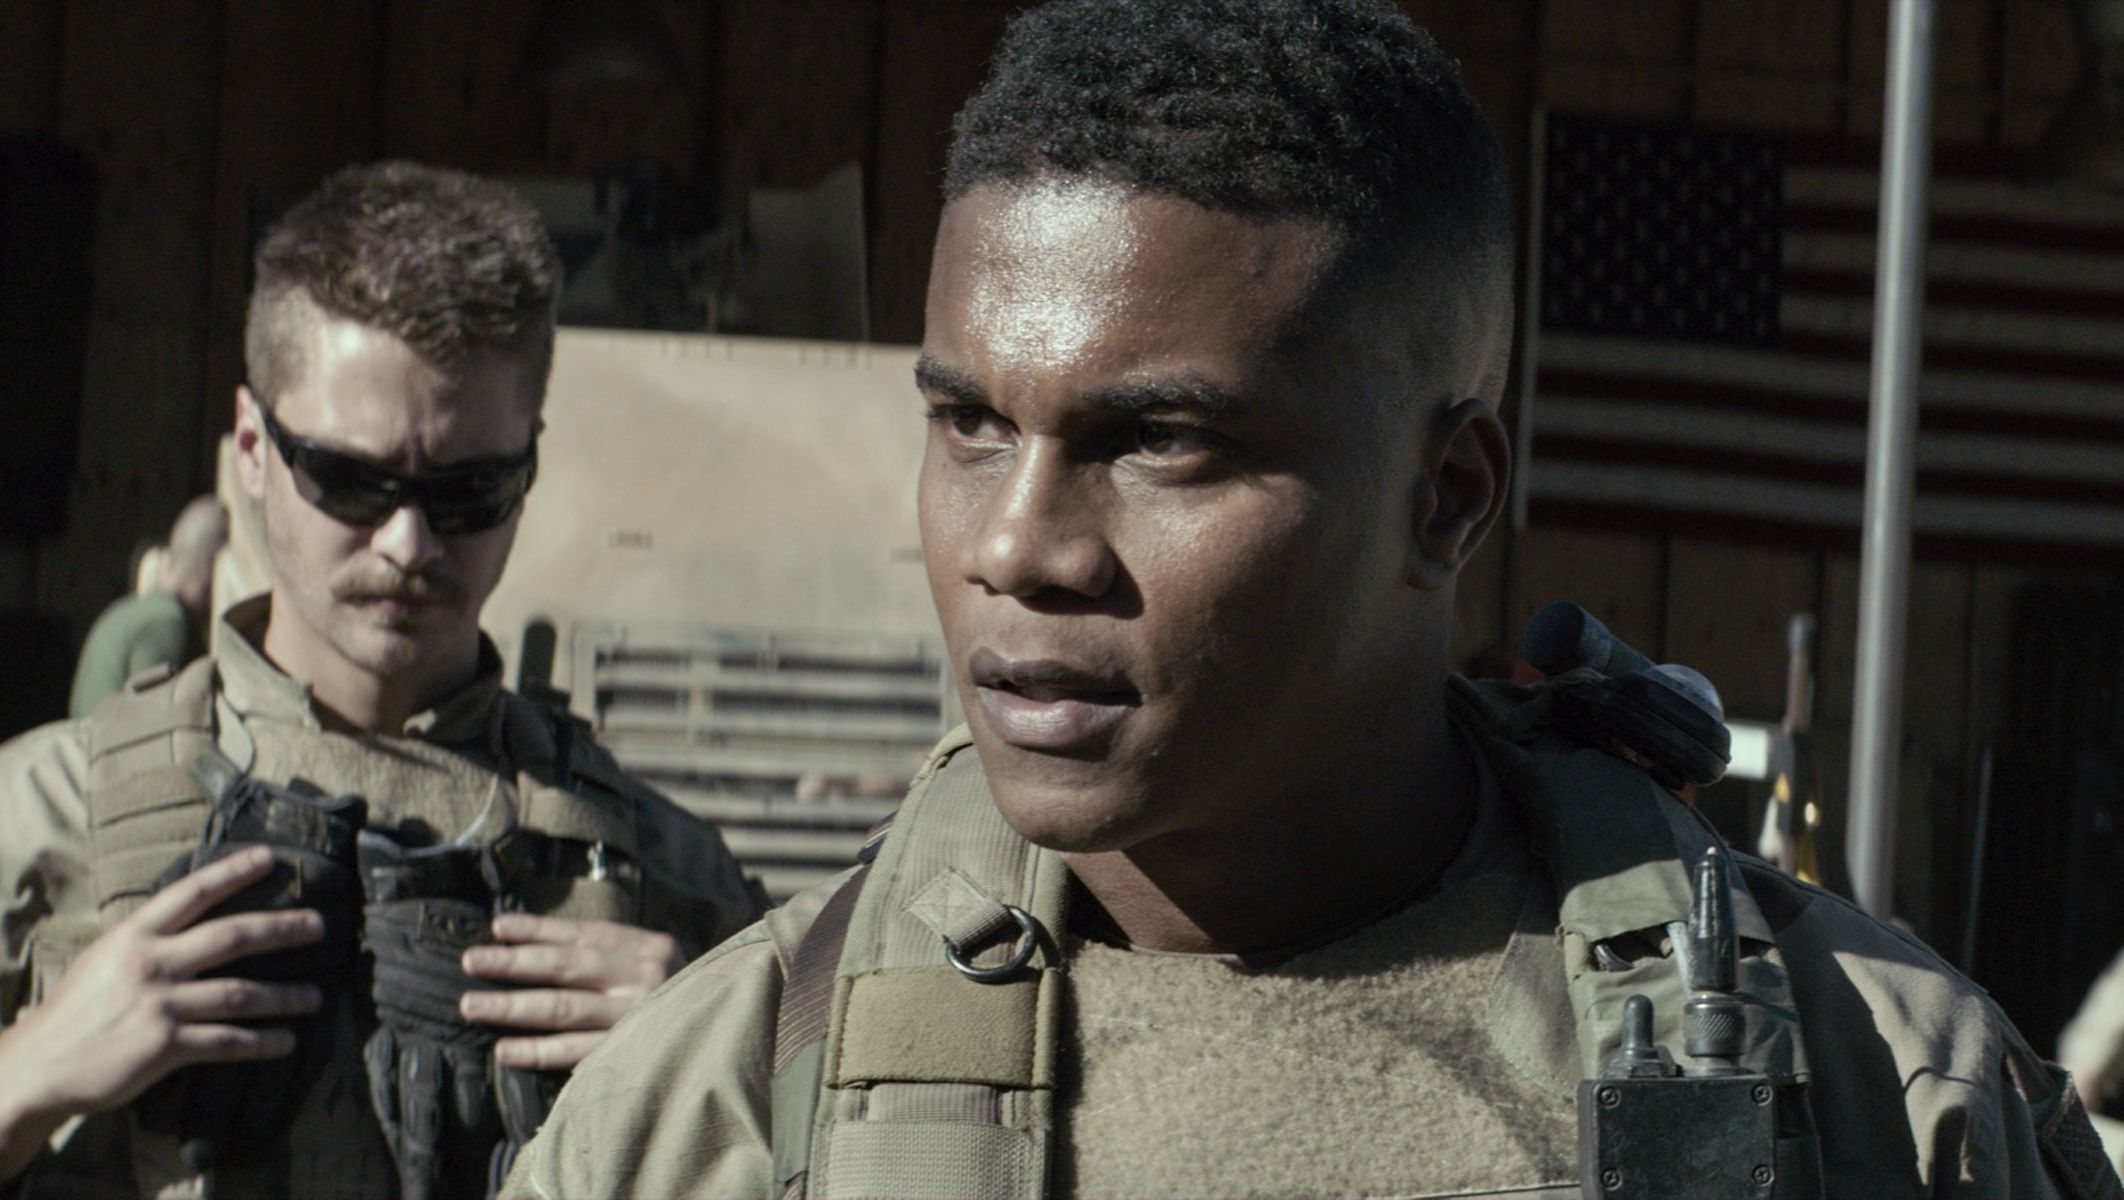 Cory Hardrict as Navy S.E.A.L. D in American Sniper